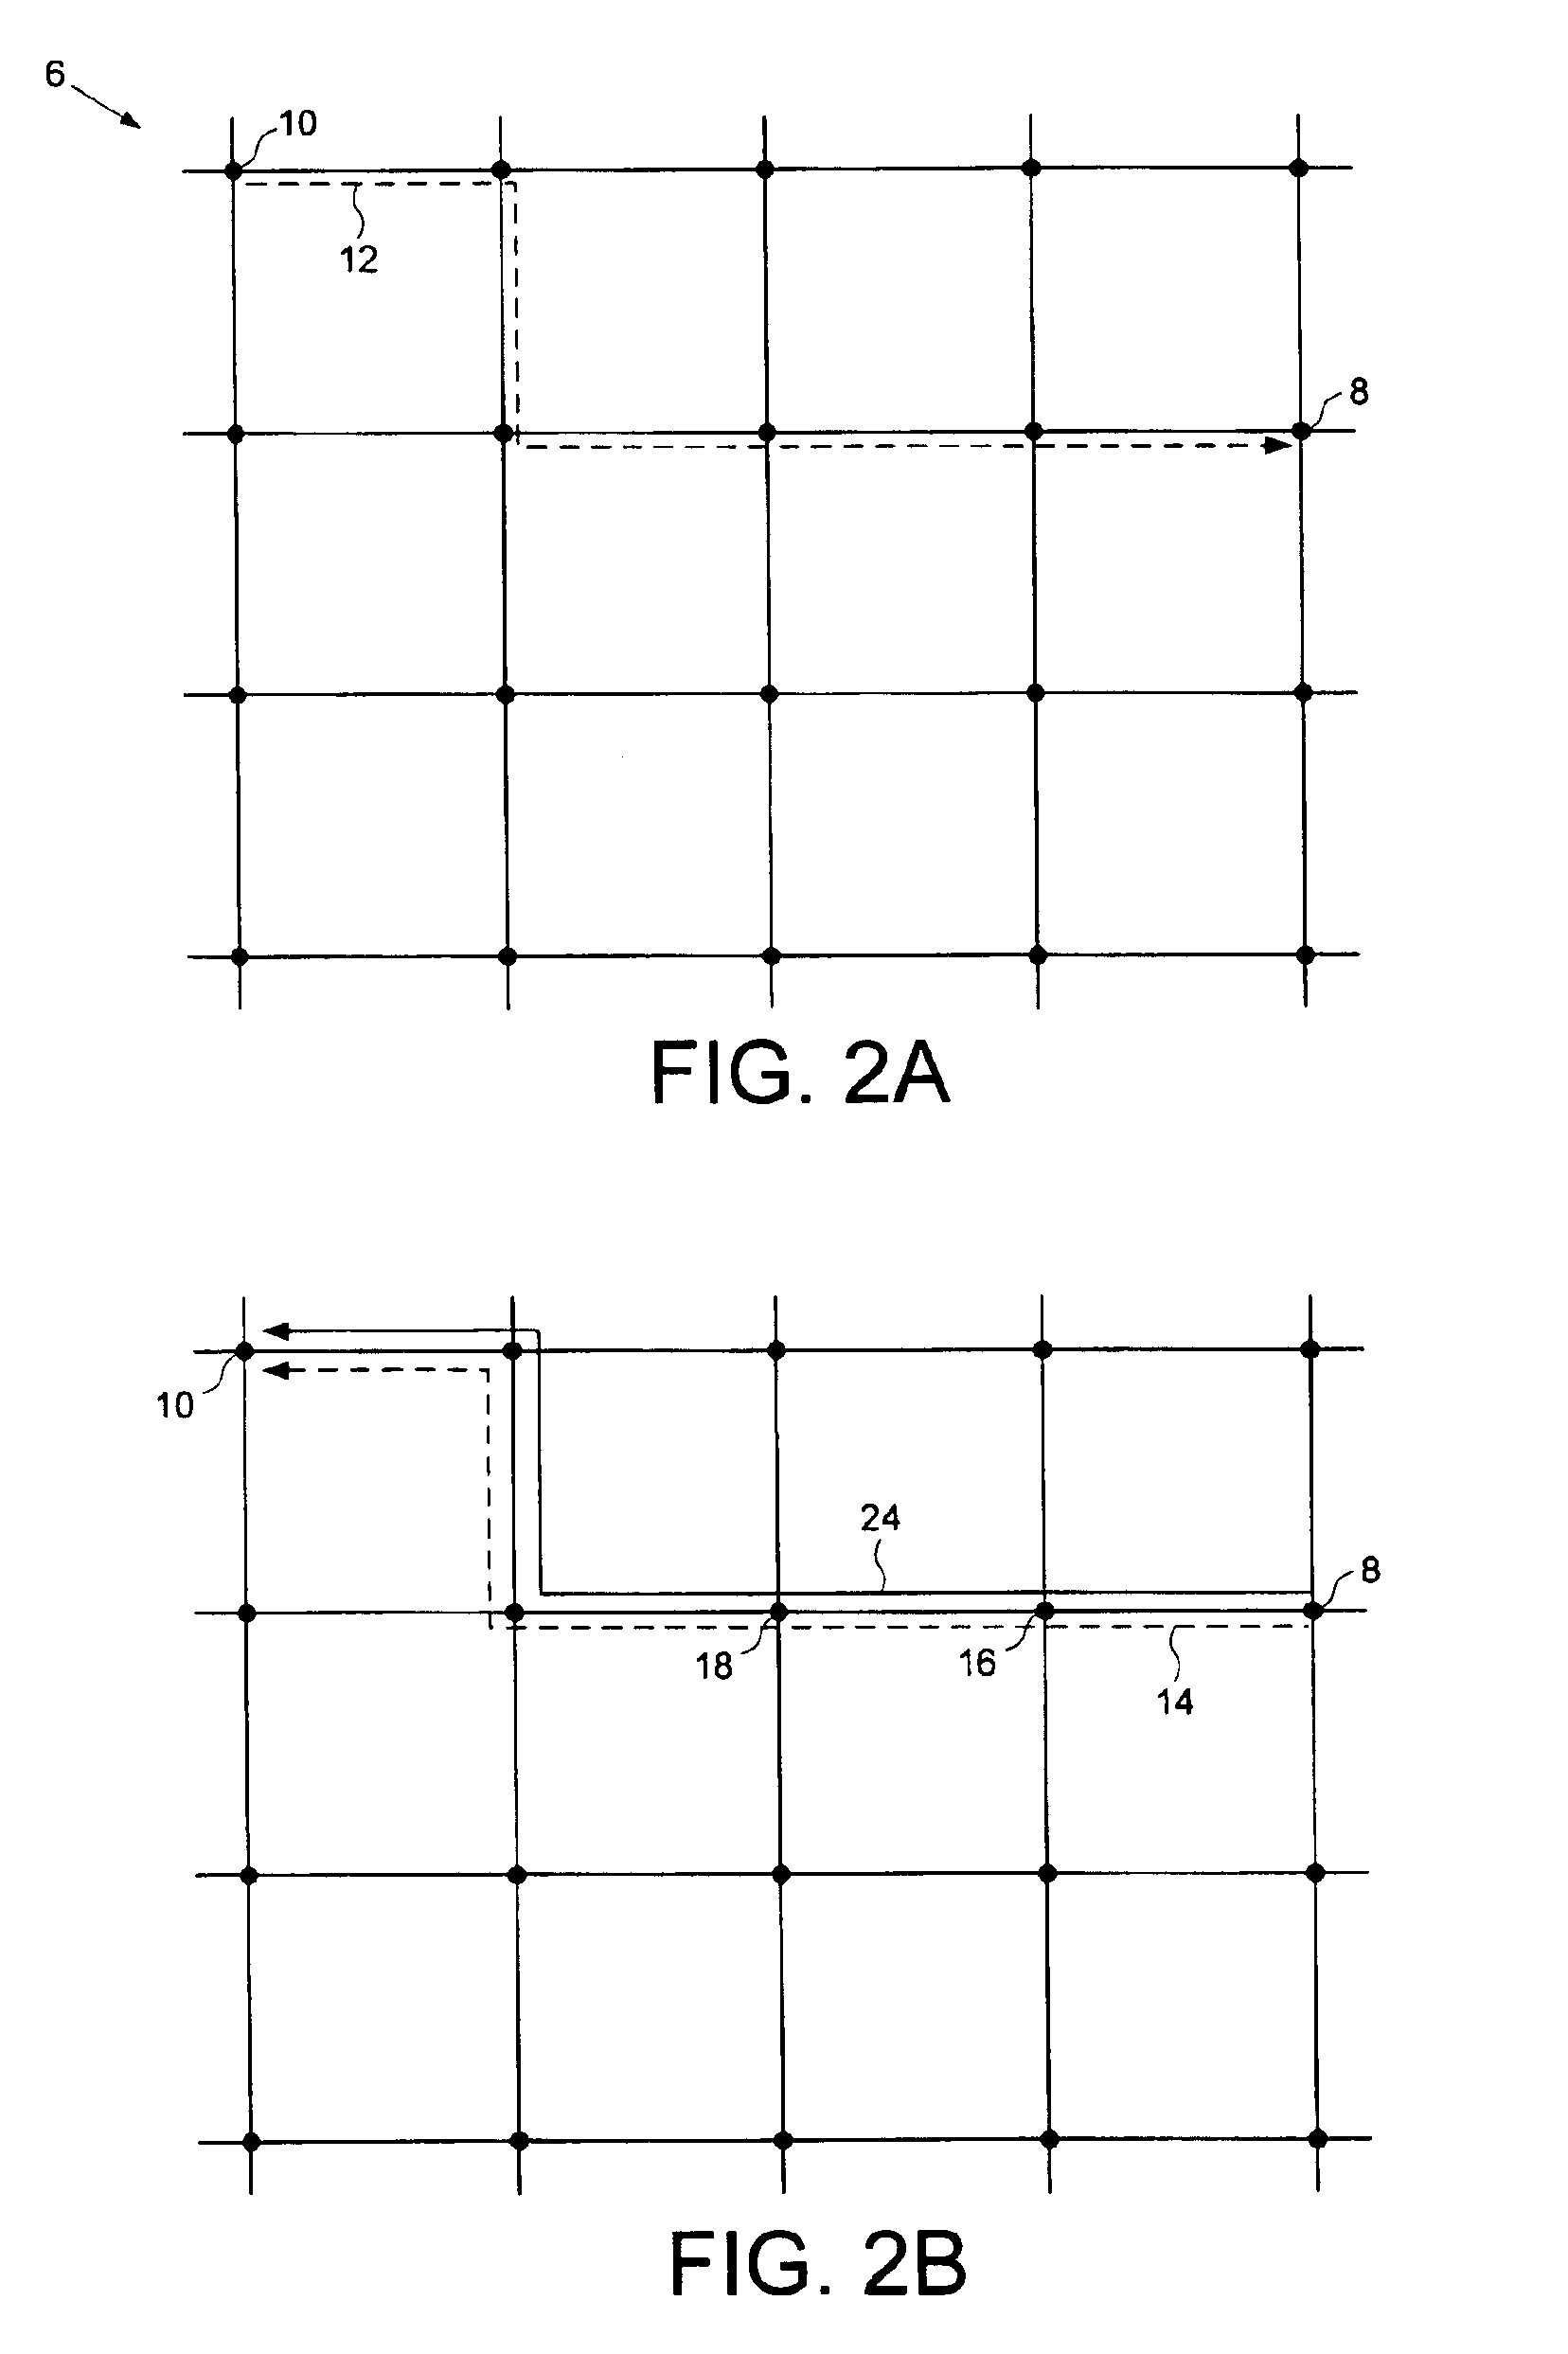 Distributed resource reservation system for establishing a path through a multi-dimensional computer network to support isochronous data